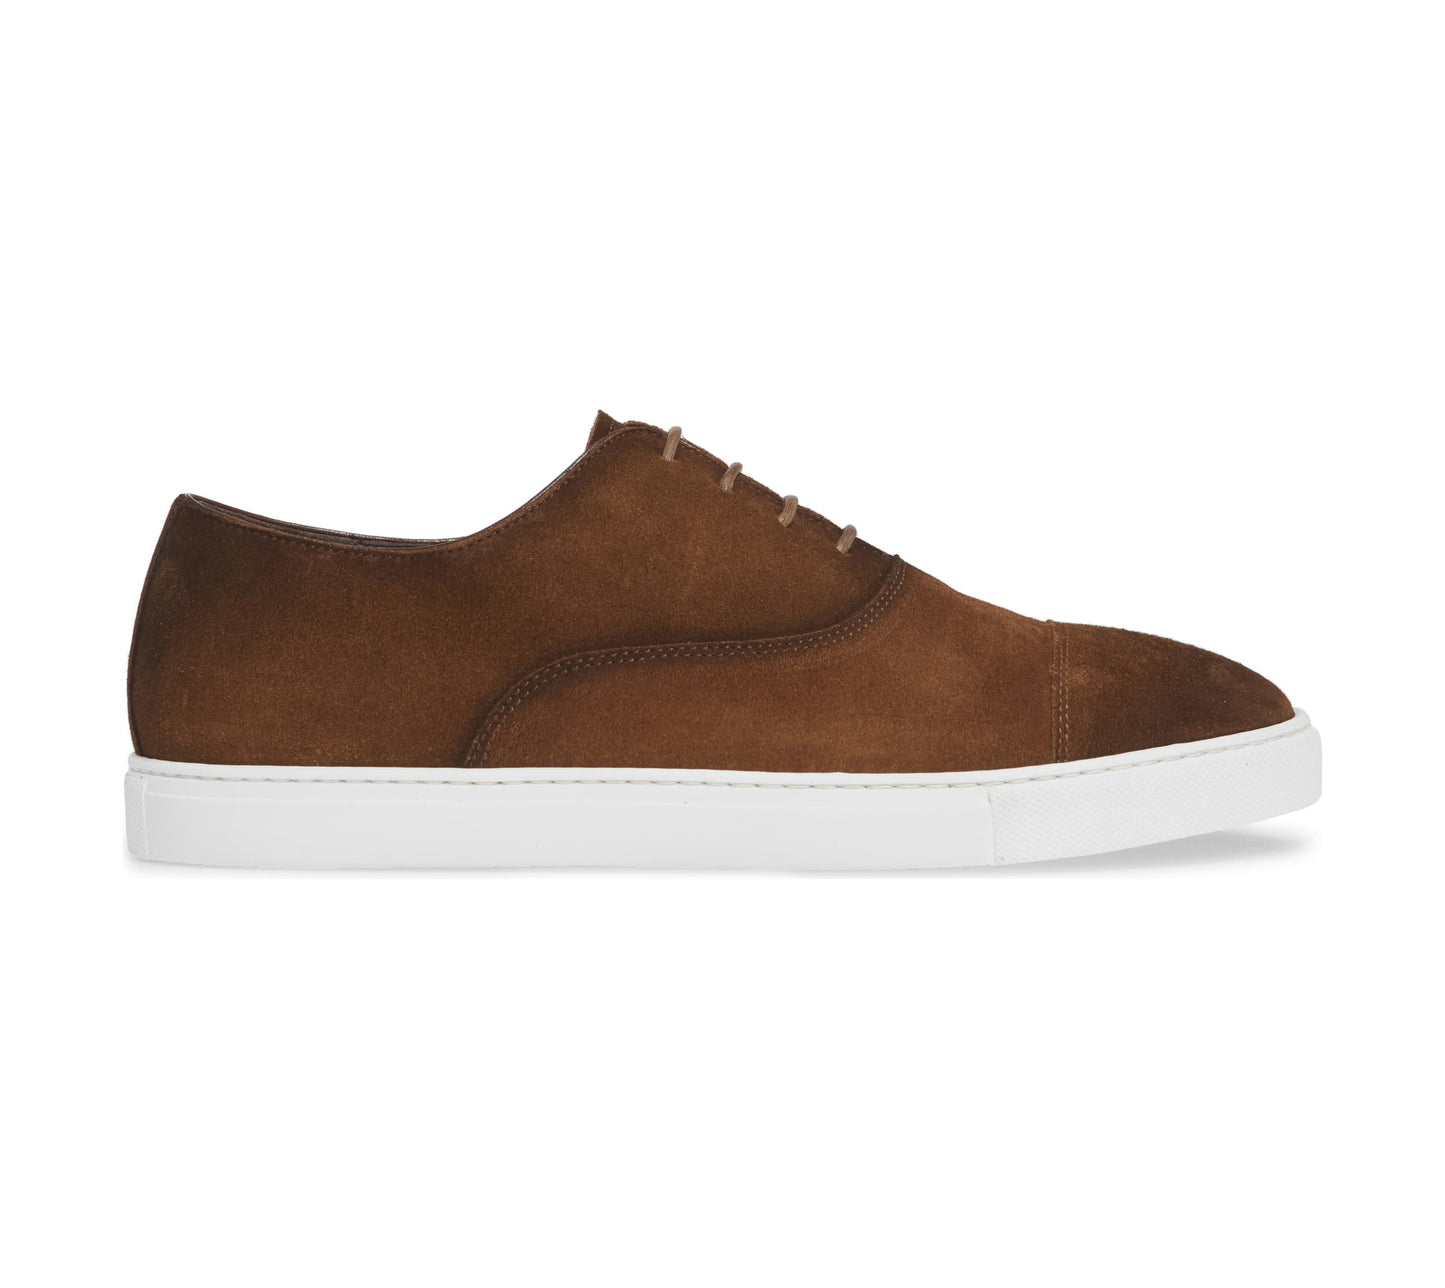 Dark Brown Burnished Suede Leather Low Top Lace Up Sneaker for Men. White Comfortable Cup Sole.